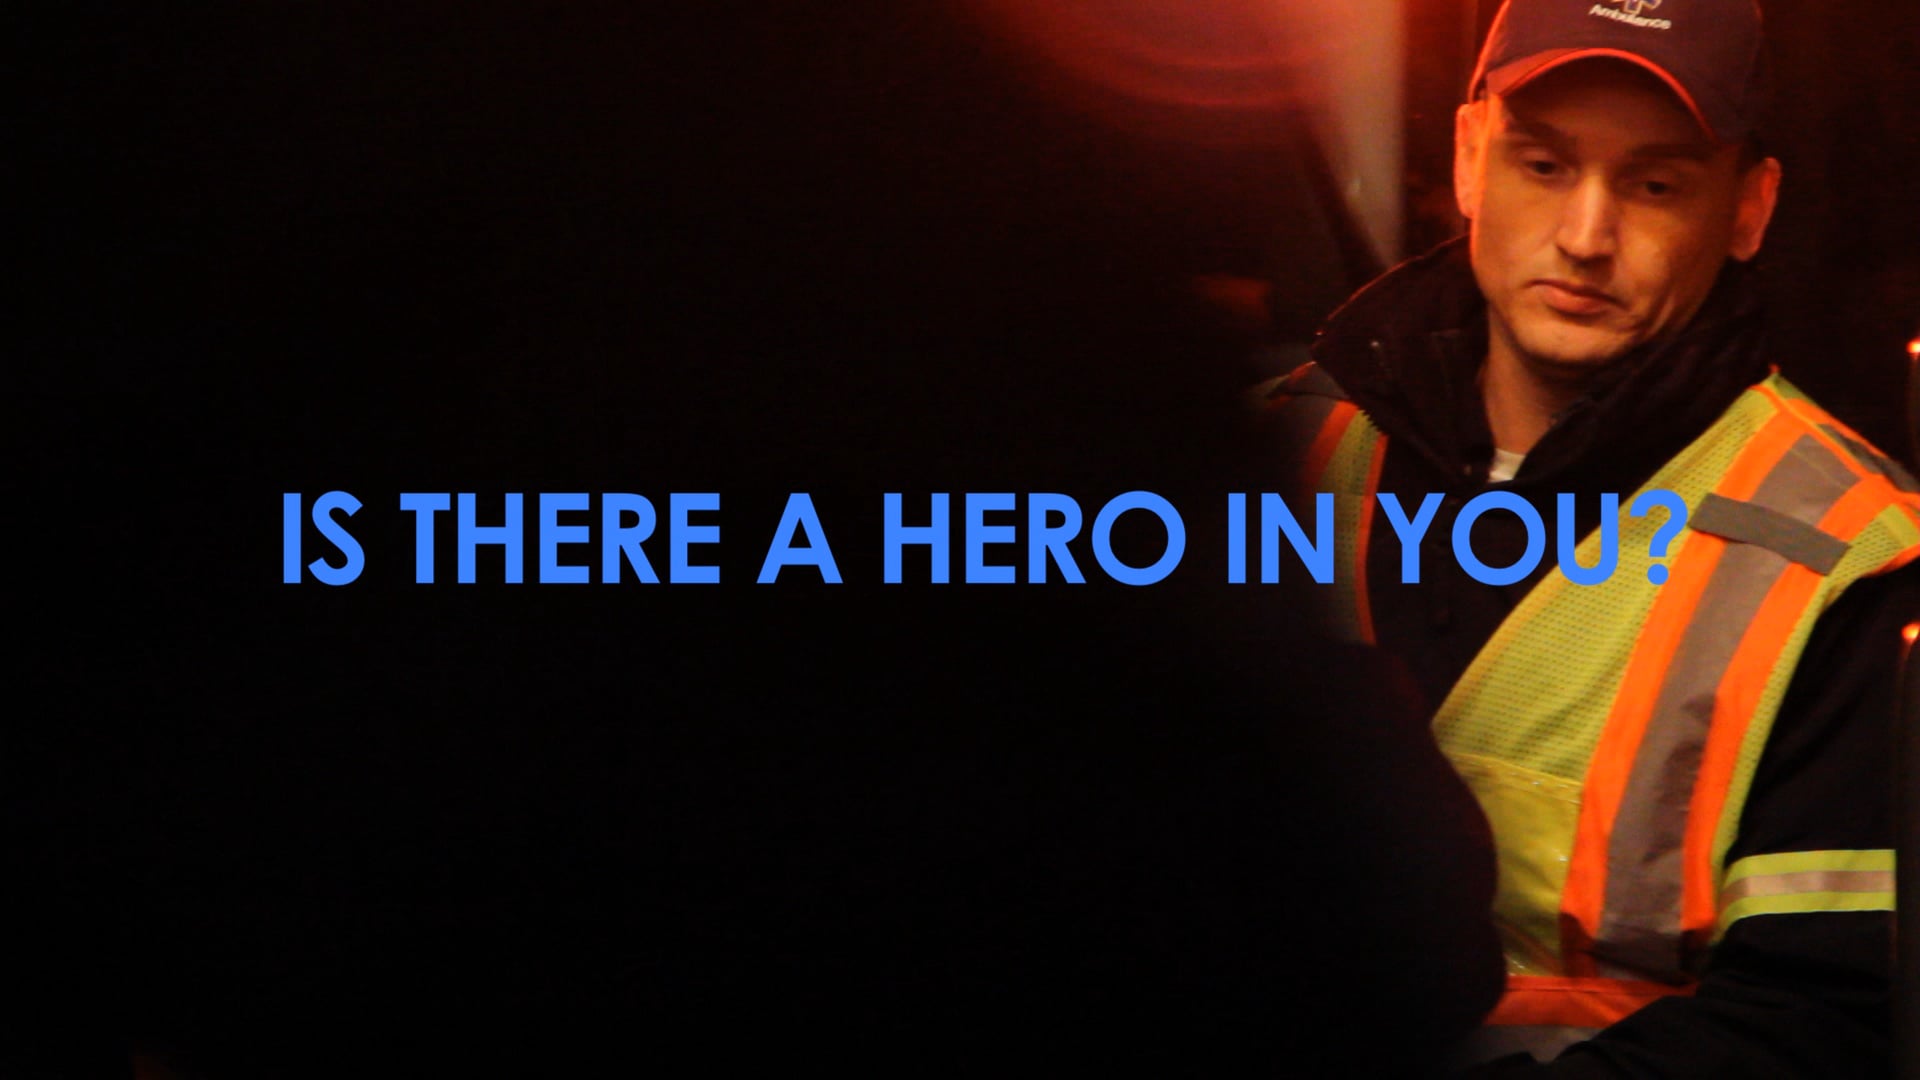 "Is There a Hero In You?" PSA for FindEMS.org